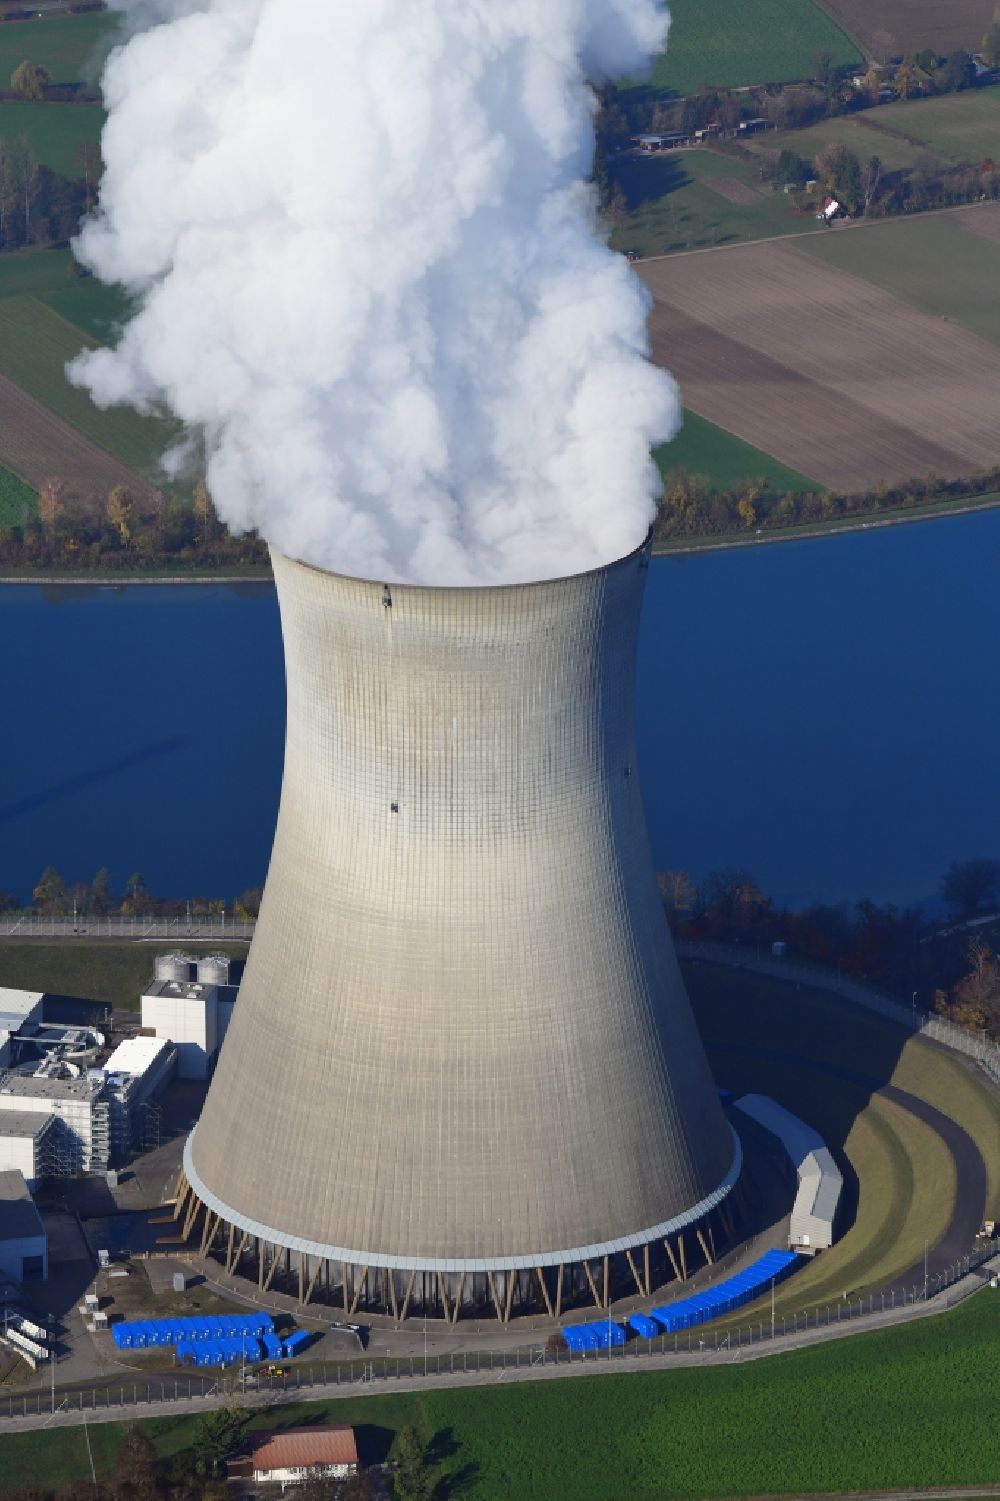 Leibstadt from the bird's eye view: Cooling tower and steam cloud at the NPP nuclear power plant Leibstadt KKL on the Rhine river in Leibstadt in the canton Aargau, Switzerland